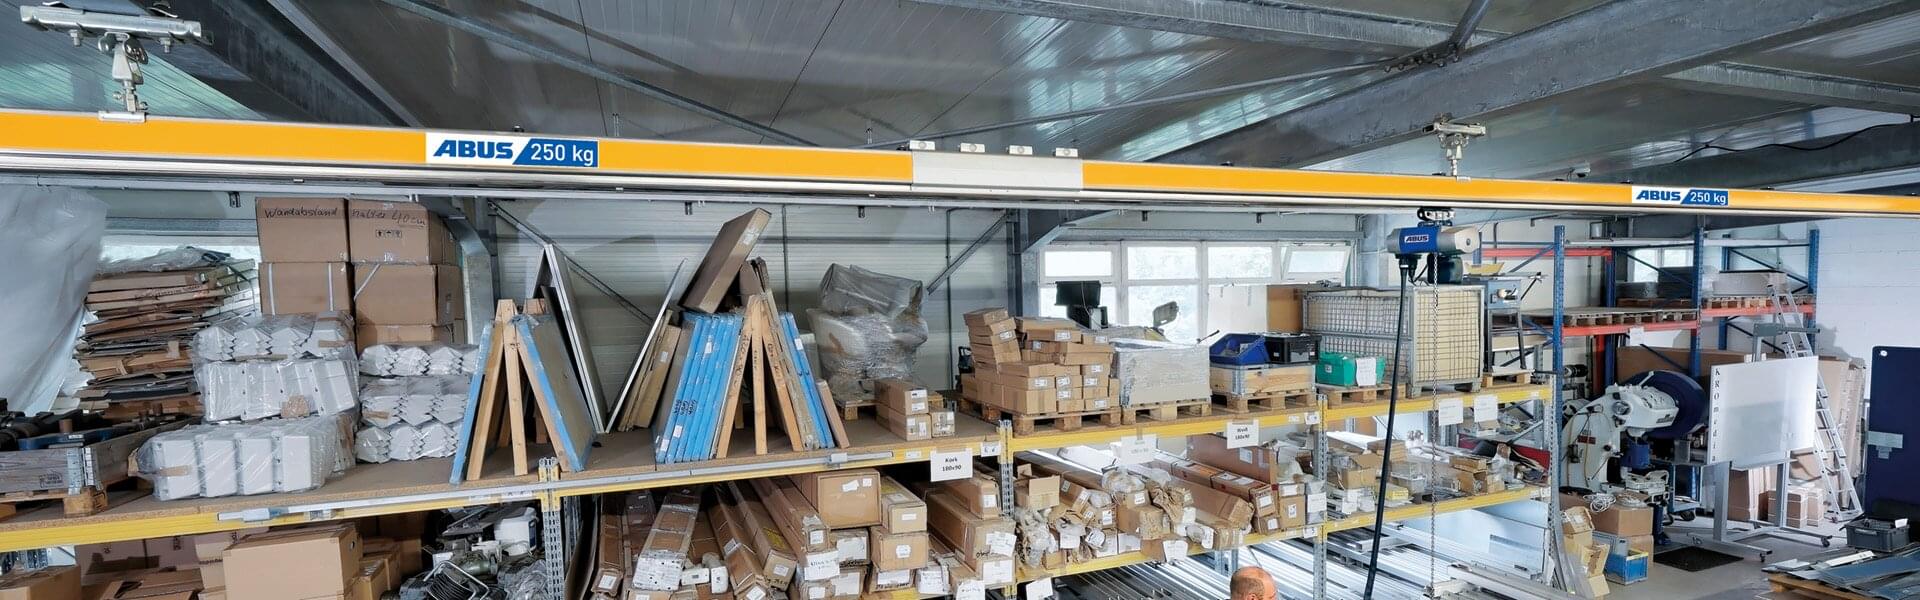 ABUS monorail in warehouse of the company KROmedia in Haiger